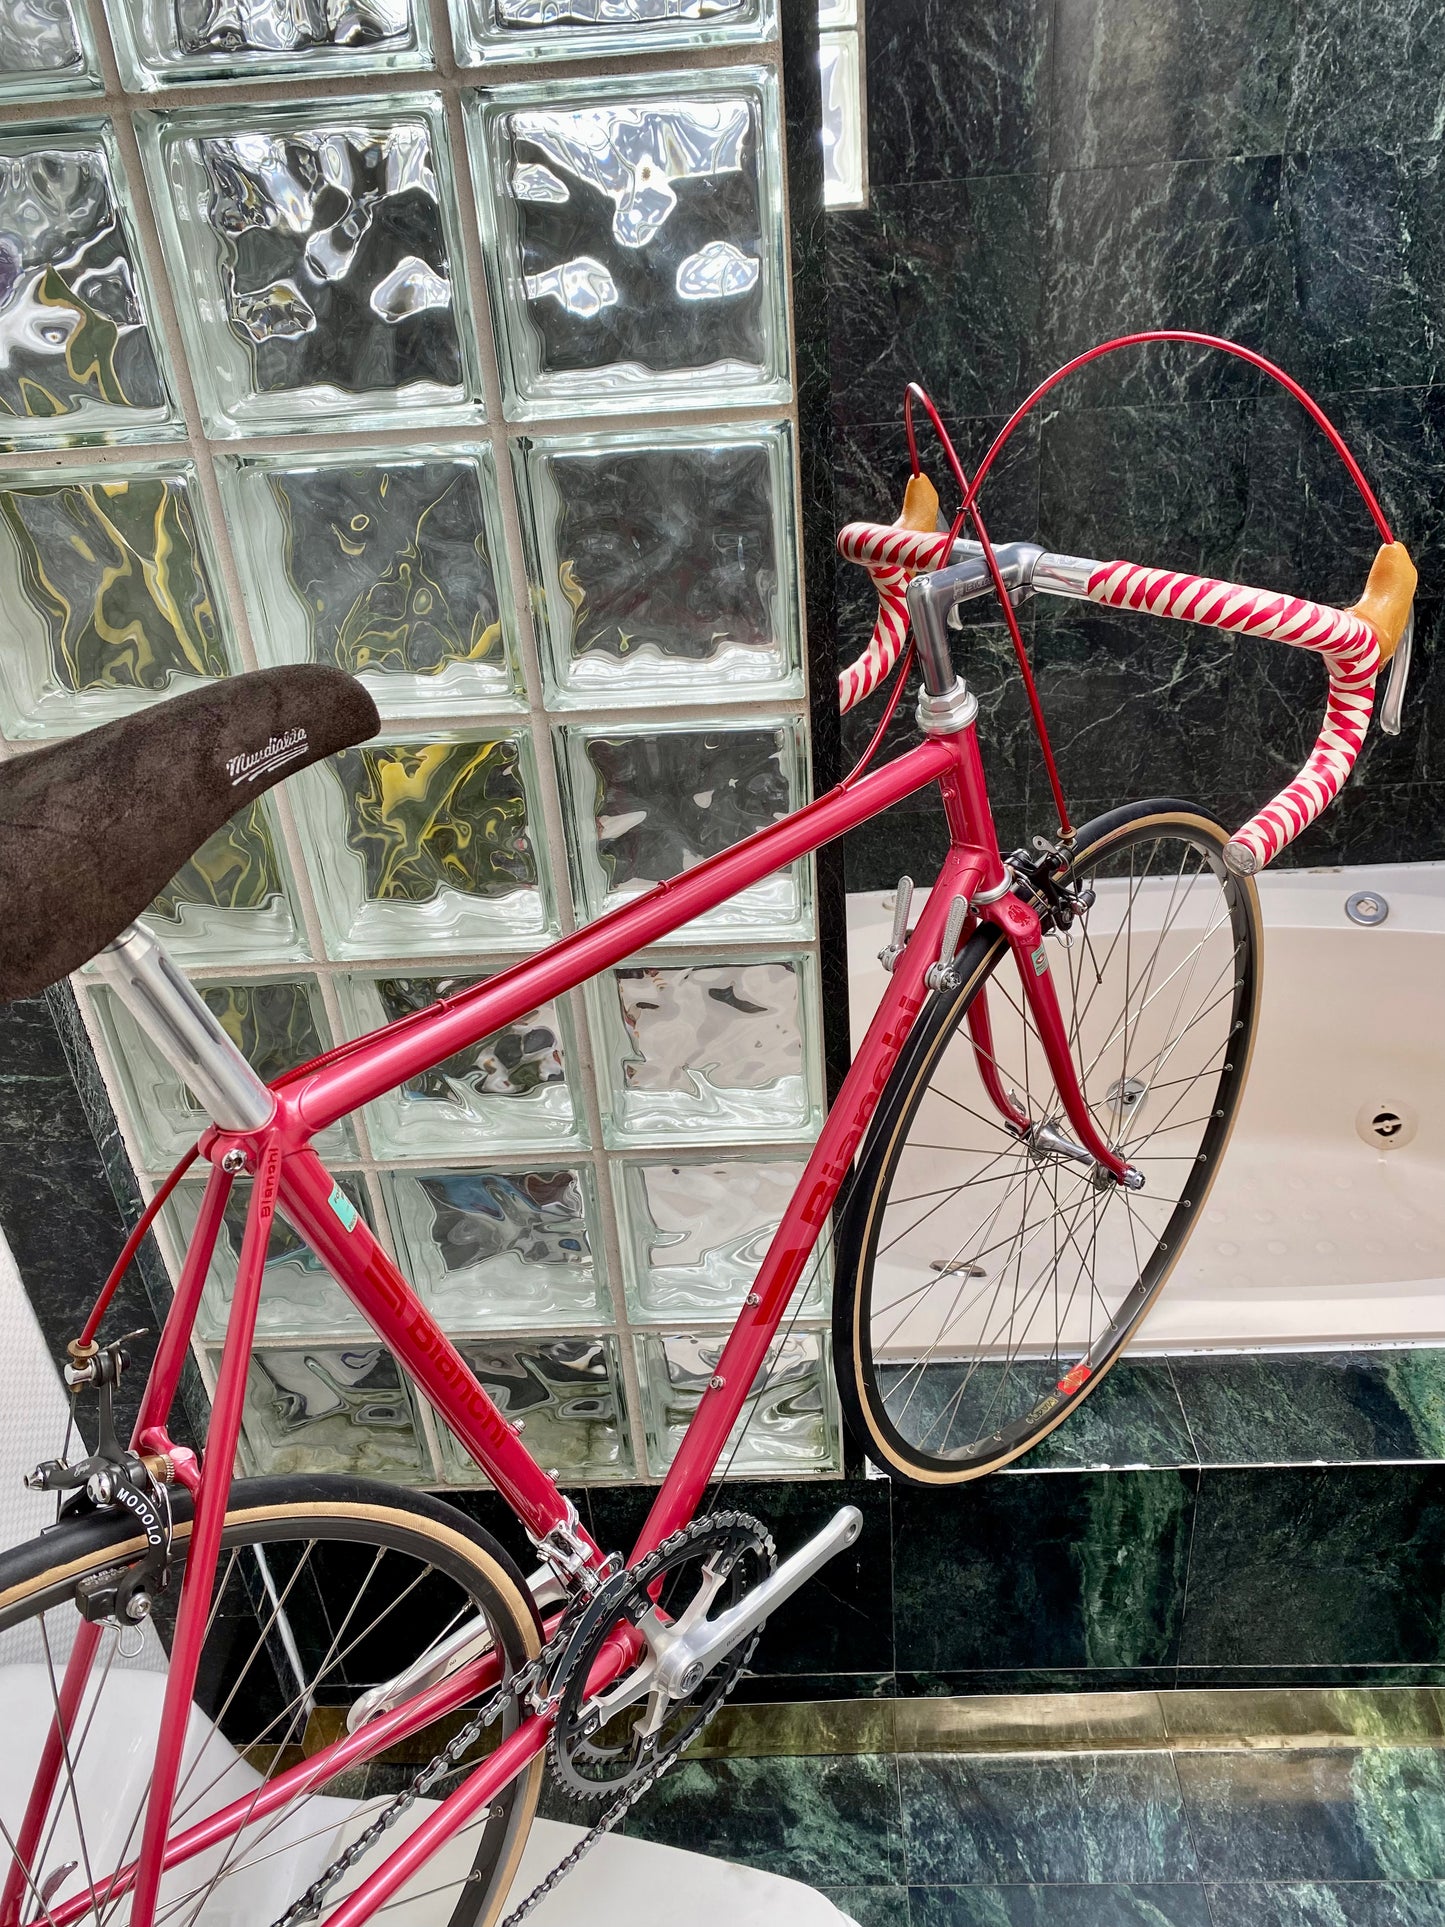 (SIZE 55cm) LIKE NEW 1980's BIANCHI ROAD BIKE - CAMPAGNOLO - SPOTLESS!!!